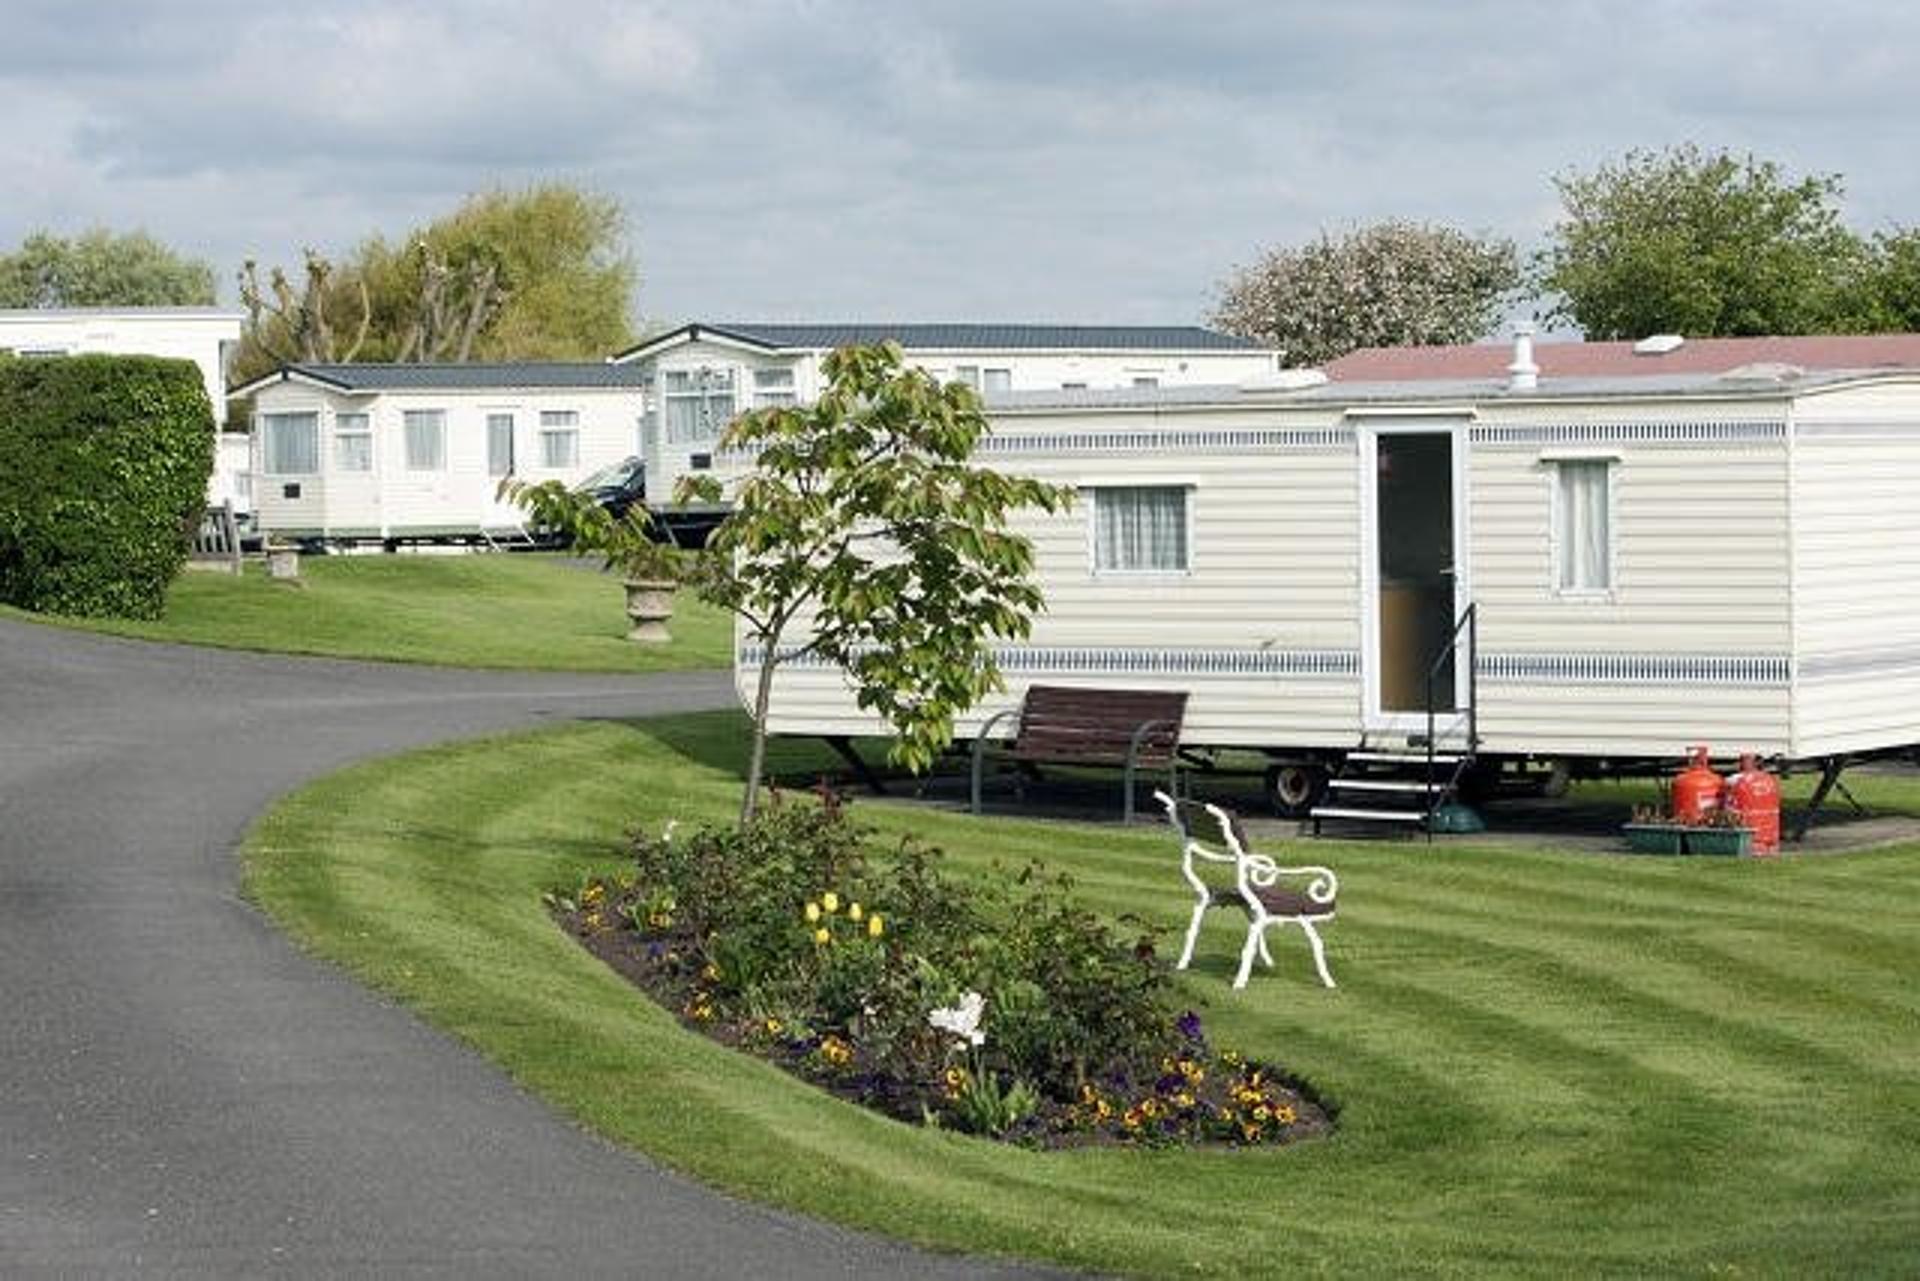 Sykes continues diversification with caravan rental firm takeover